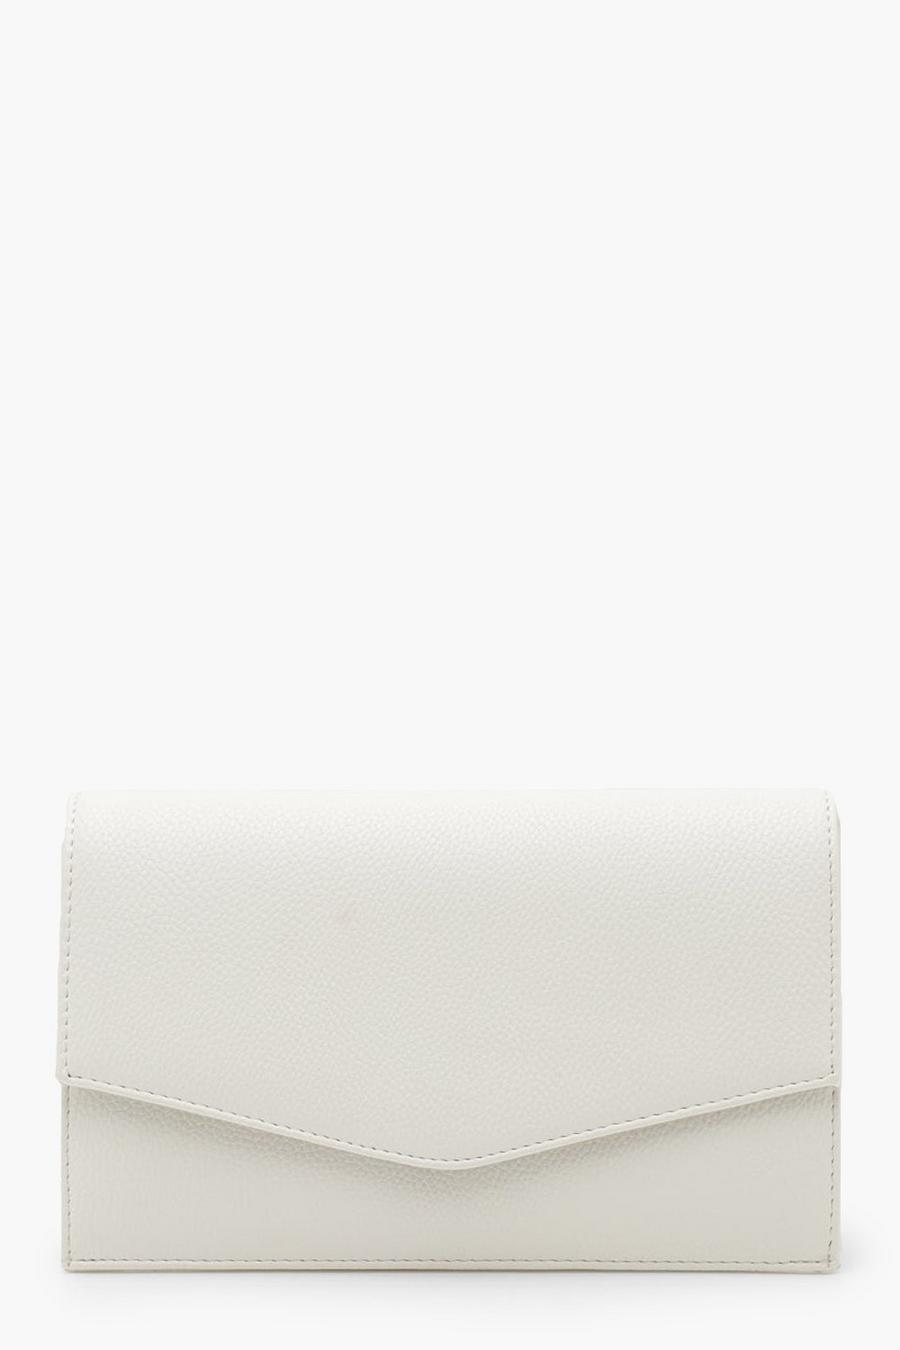 White weiß Grainy PU Envelope Clutch Bag and Chain